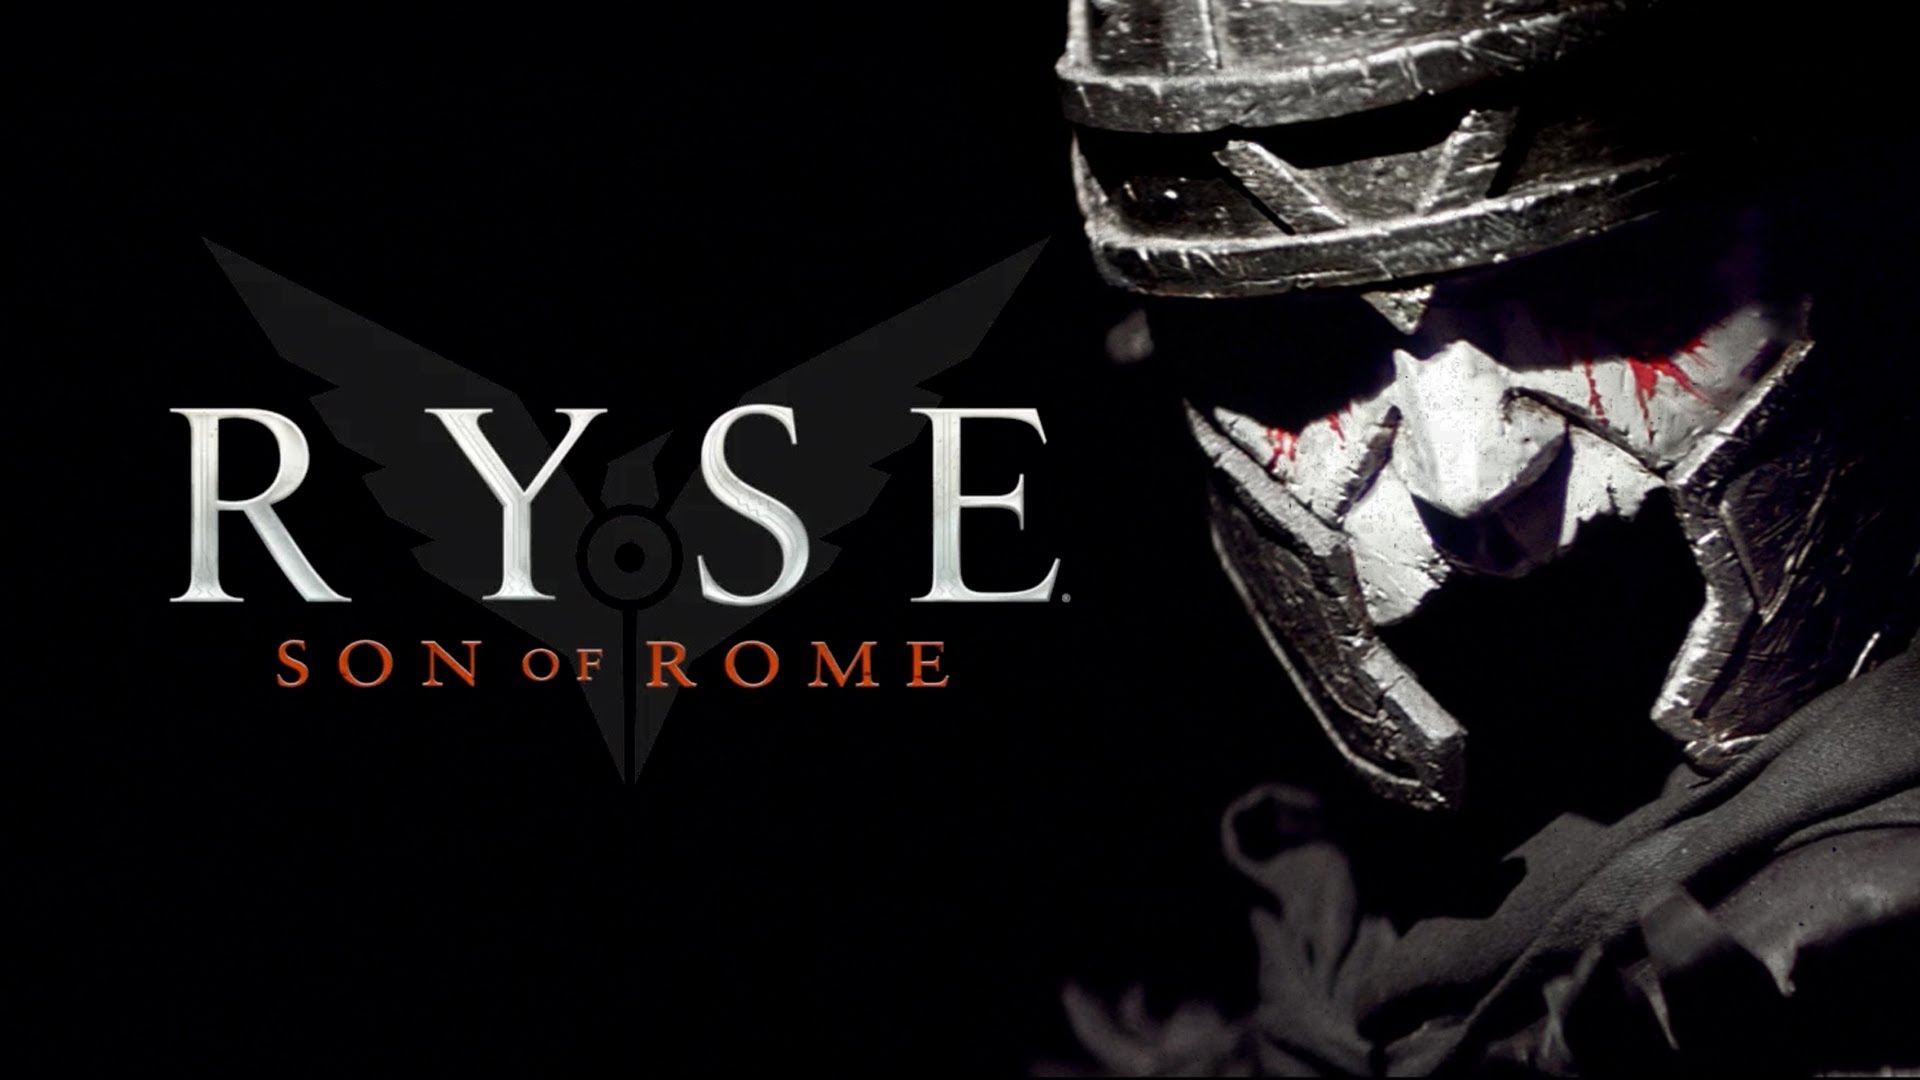 Video For Ryse: Son of Rome – The Fall, Episode One Now Available